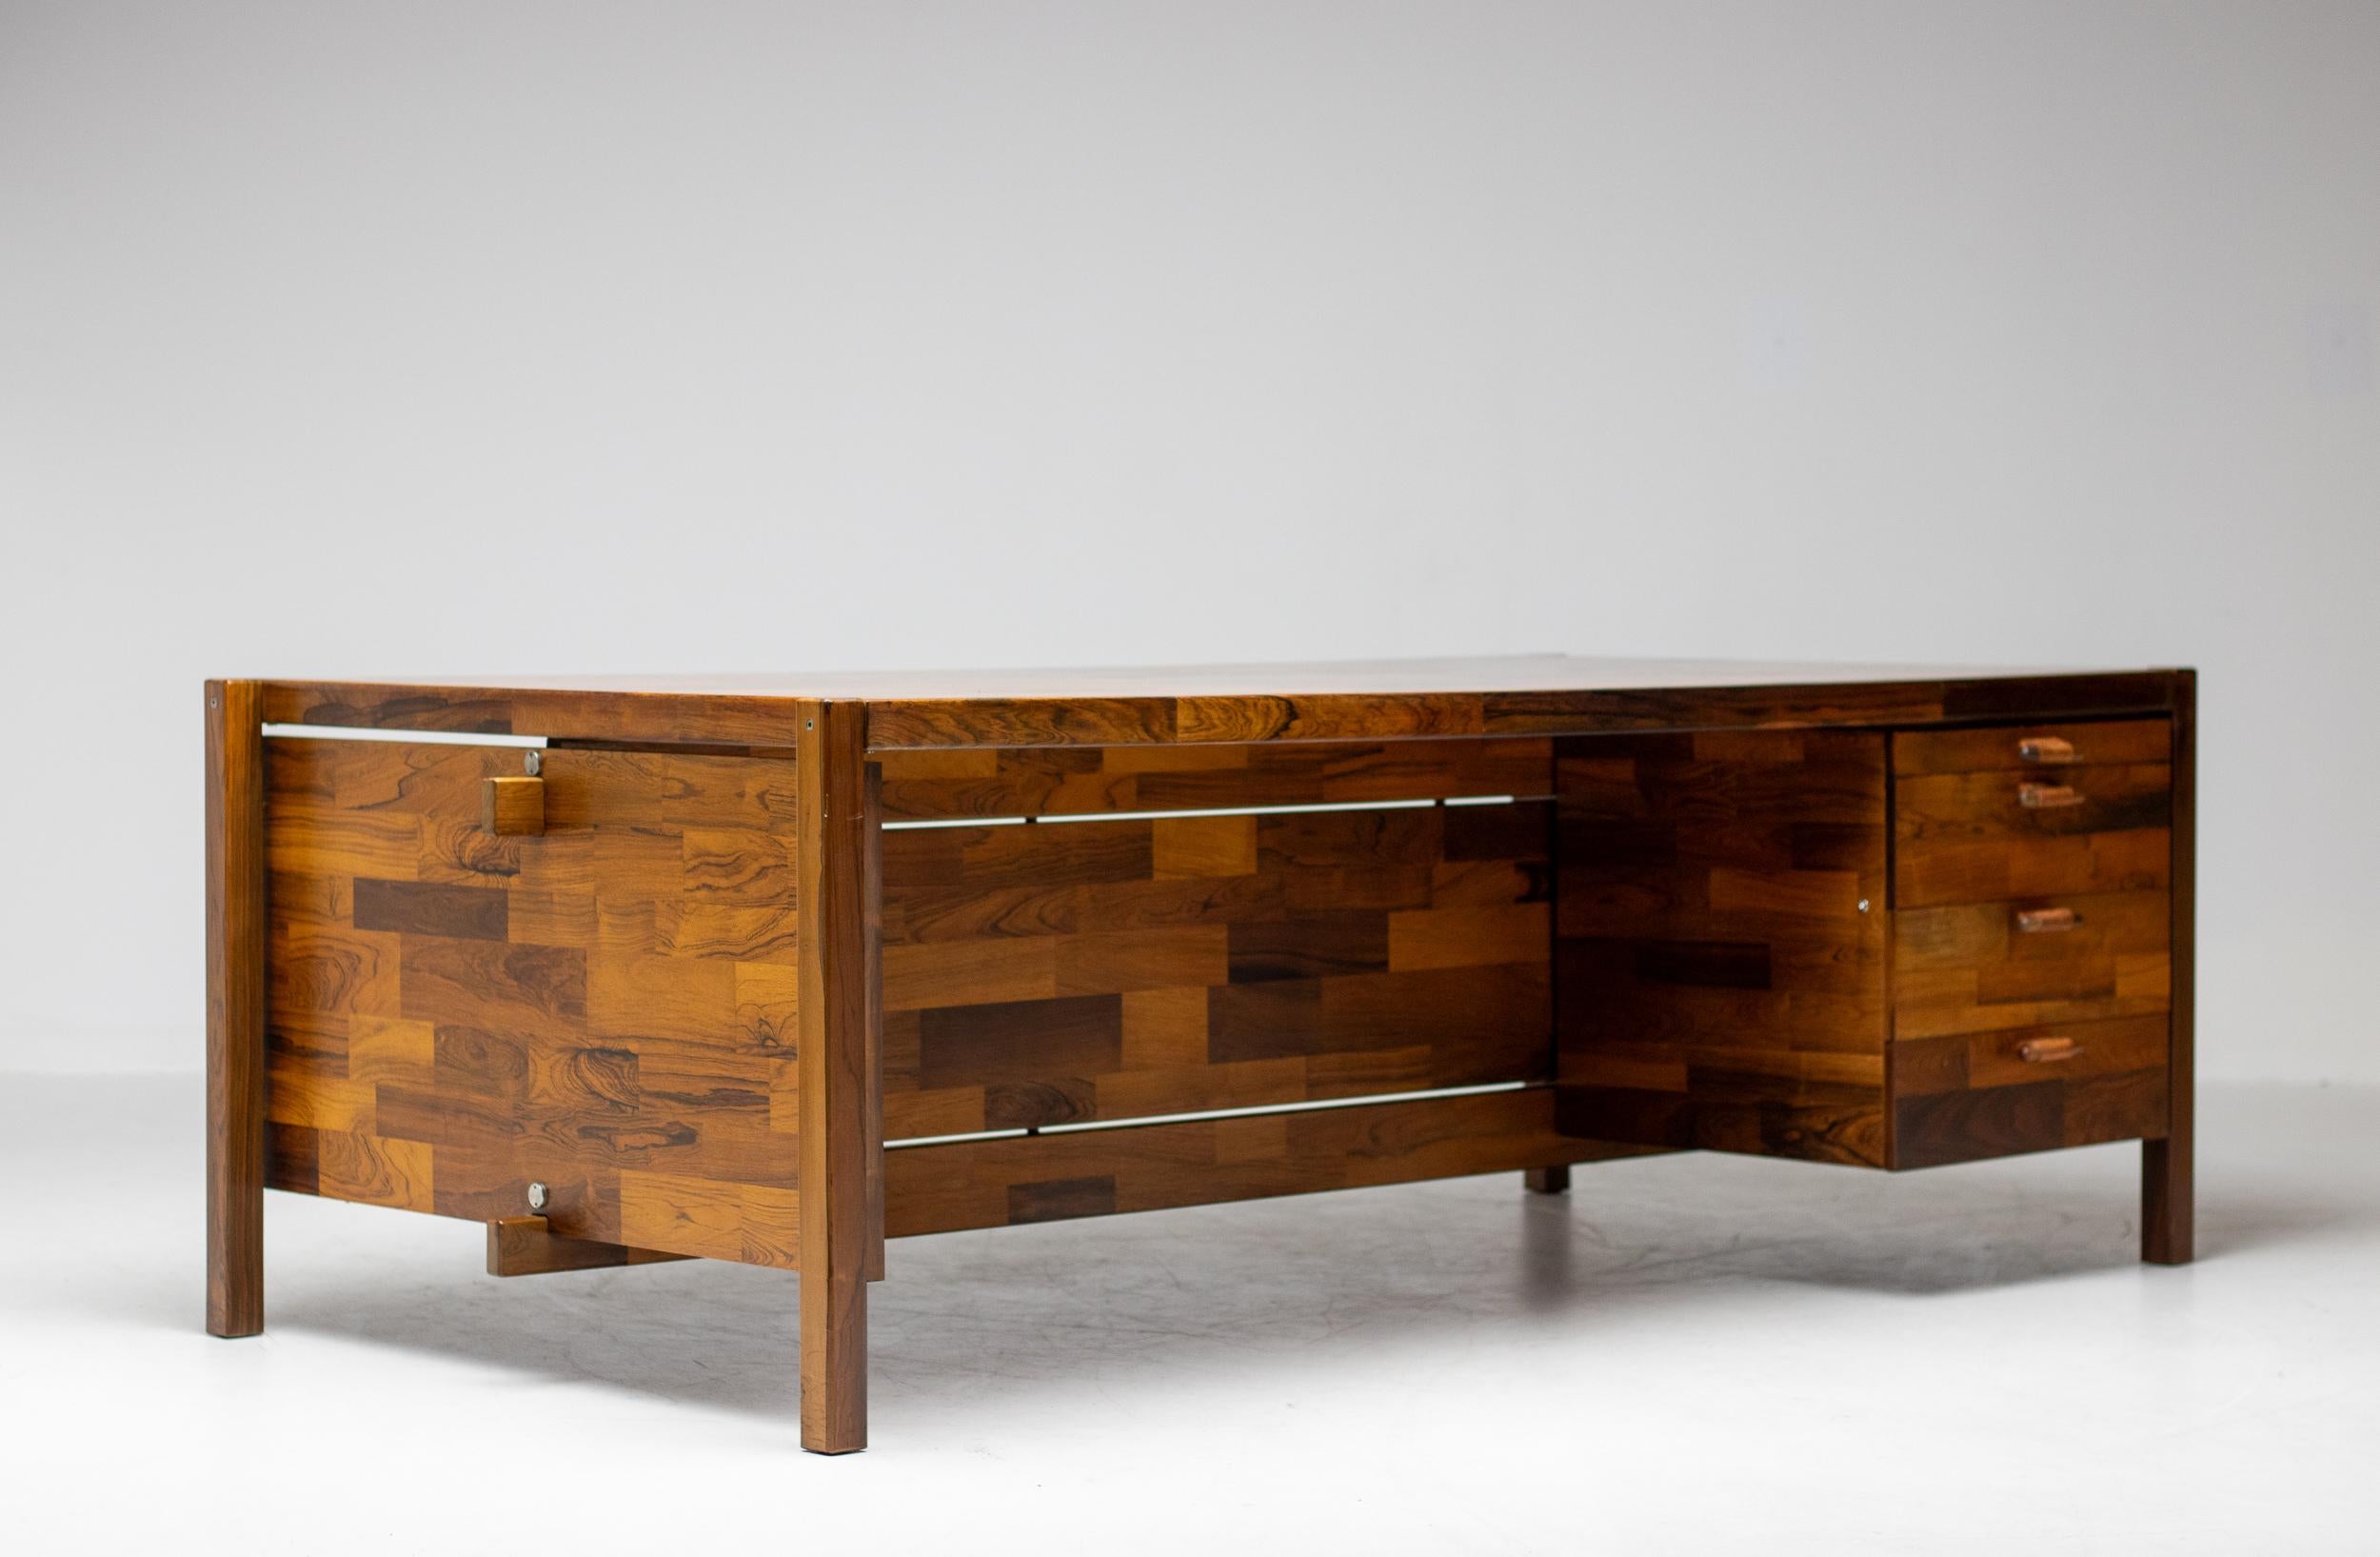 Beautiful large desk designed by Jorge Zalszupin, manufactured by L’Atelier San Paulo, circa 1960. 
Made of high quality jacaranda wood. The desk has four drawers with very well crafted grips made of jacaranda wood and natural leather. In good